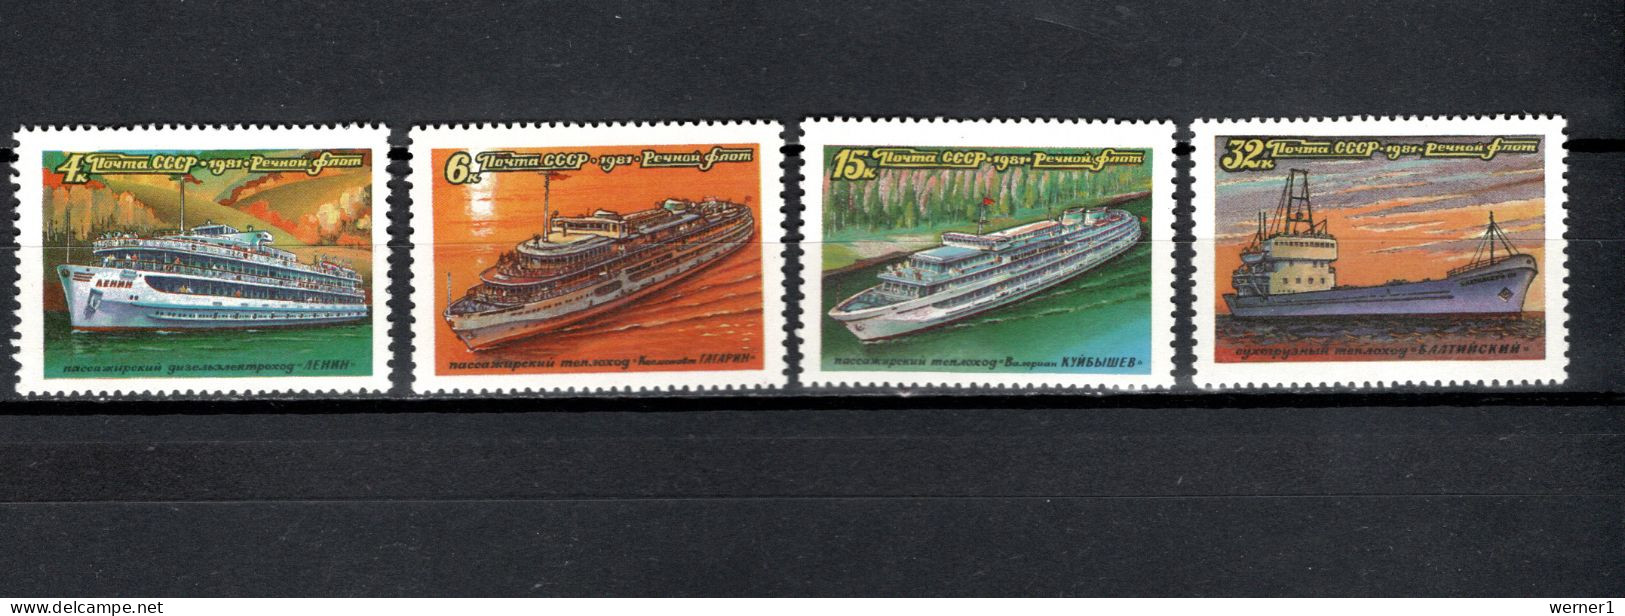 USSR Russia 1981 Space, Ships Set Of 4 MNH - Russia & USSR